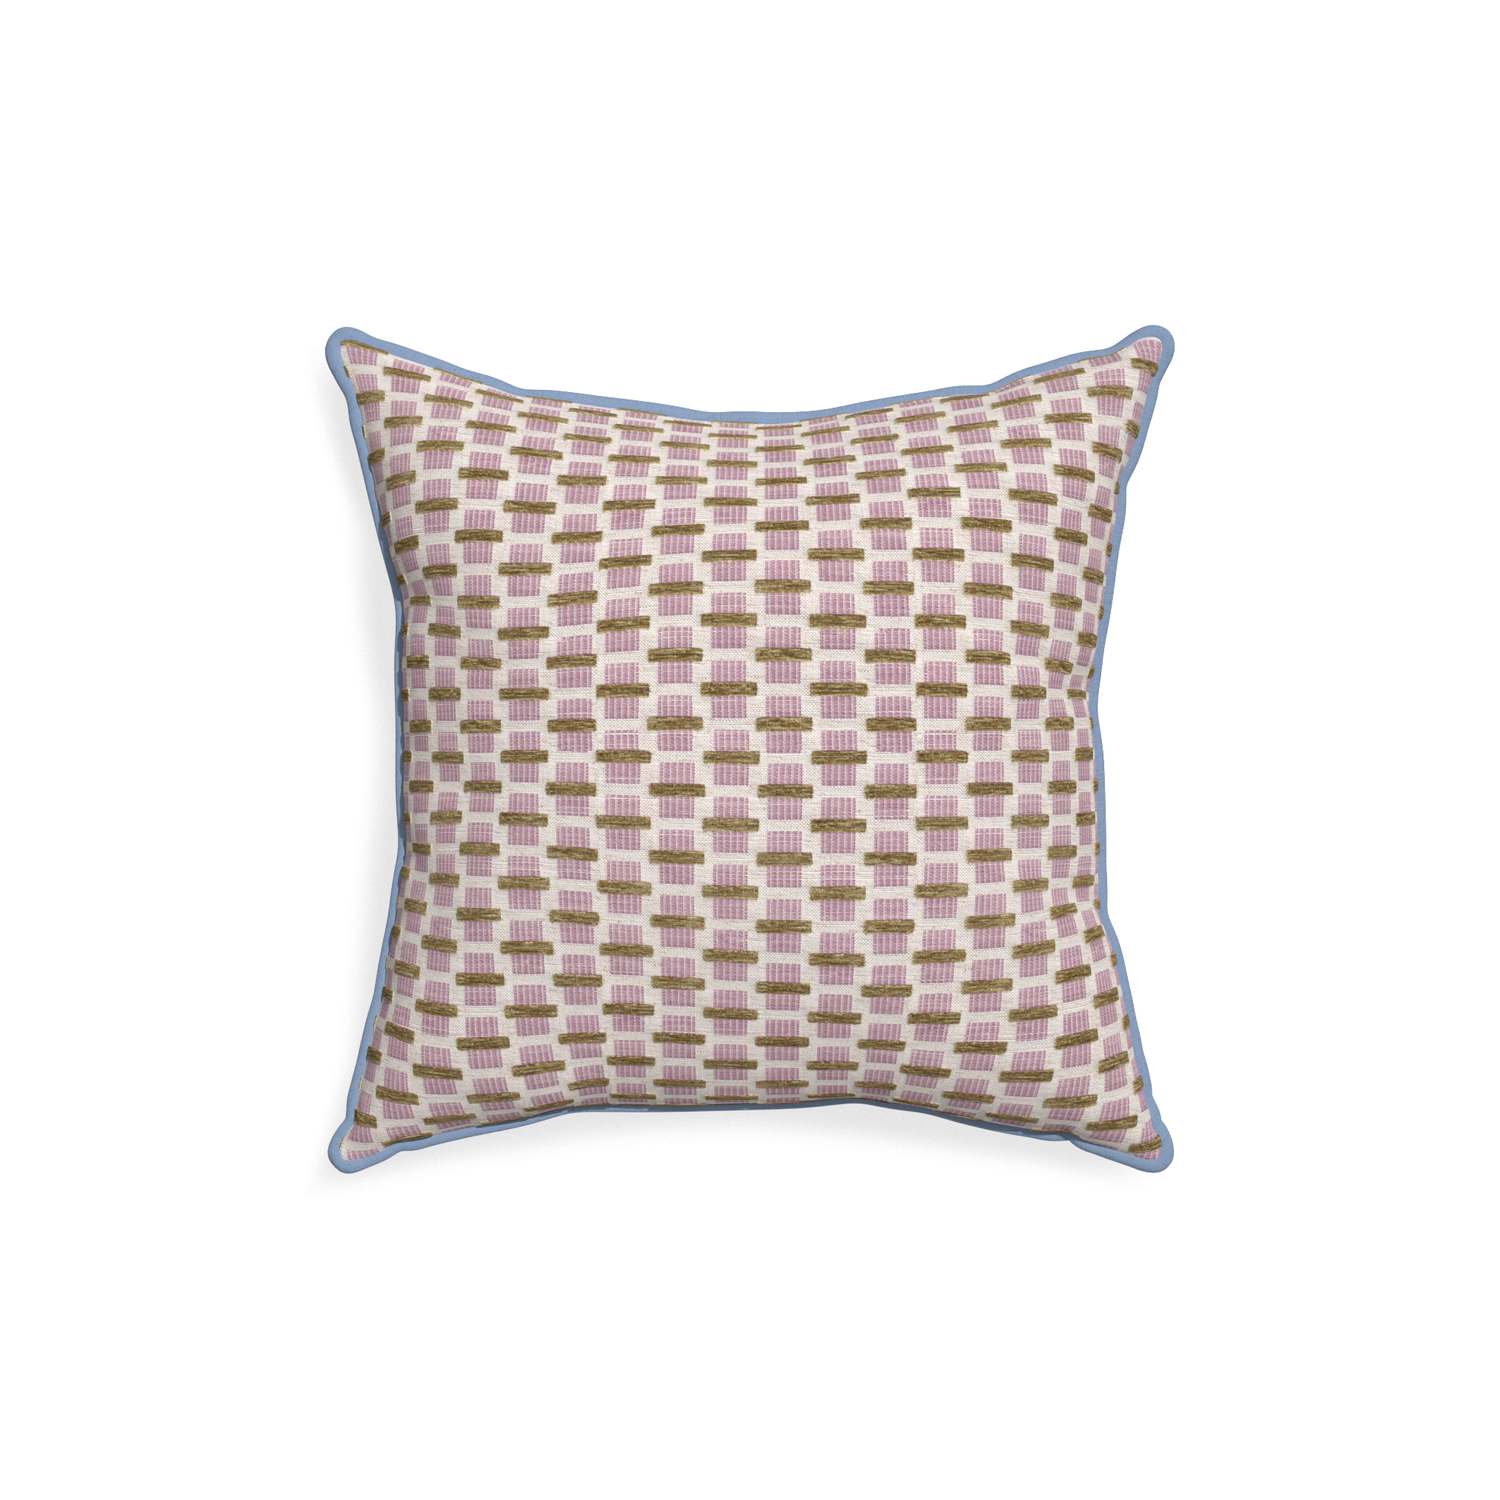 18-square willow orchid custom pink geometric chenillepillow with sky piping on white background